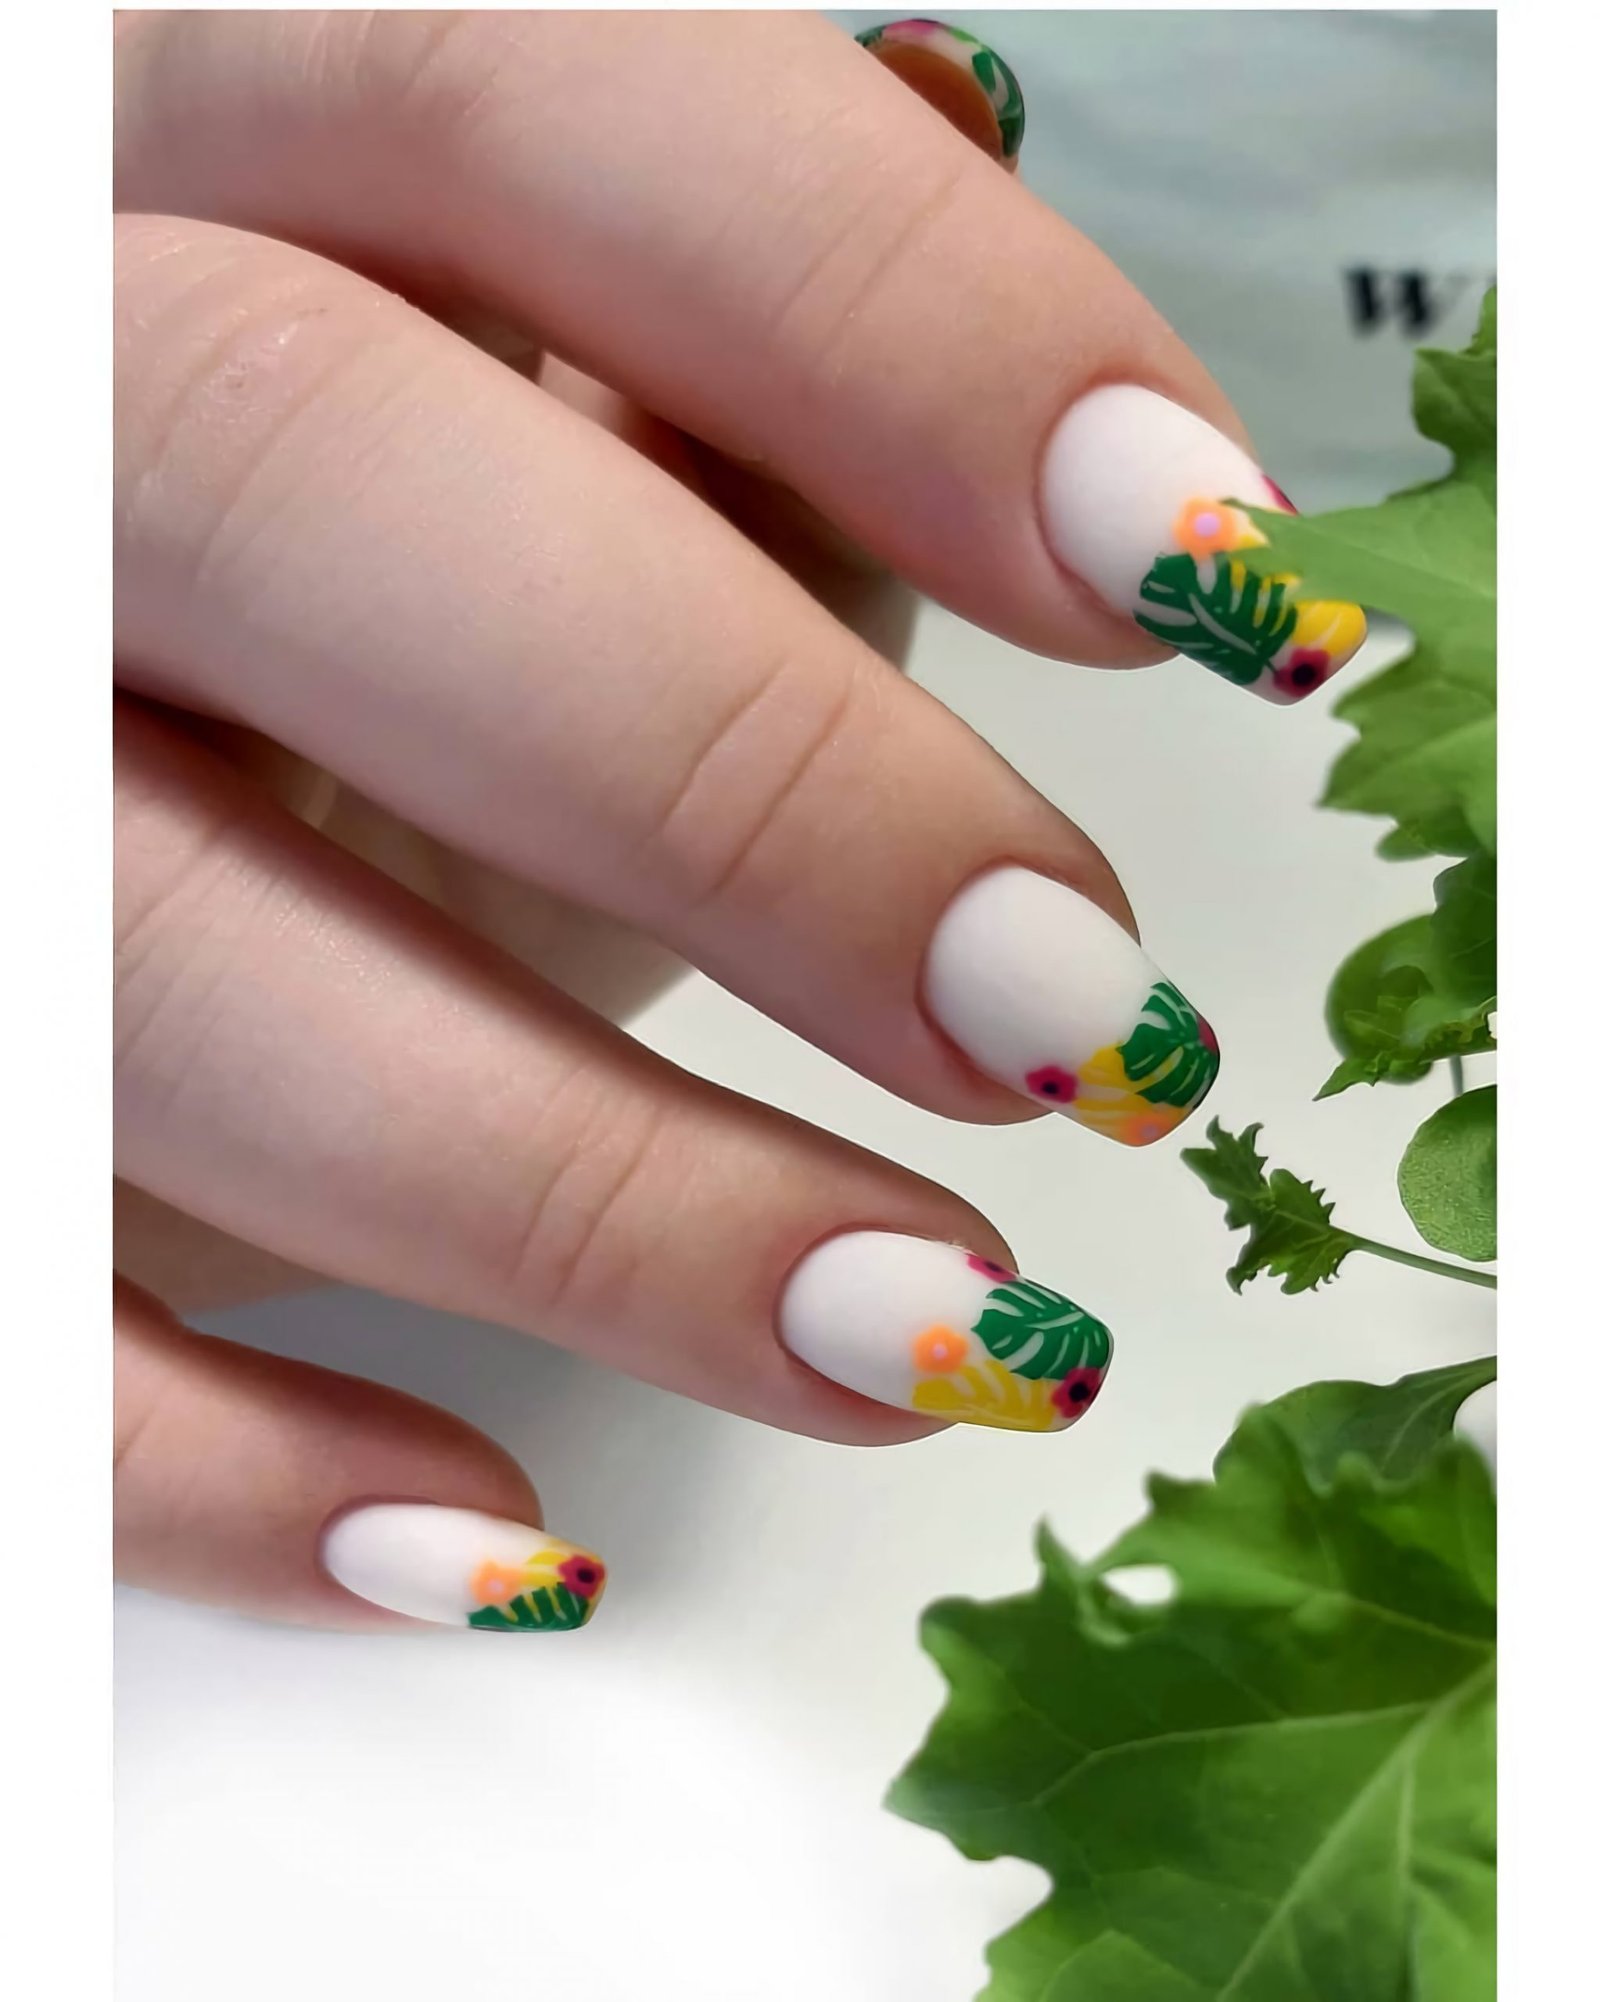 beautiful nails with tropical leaves